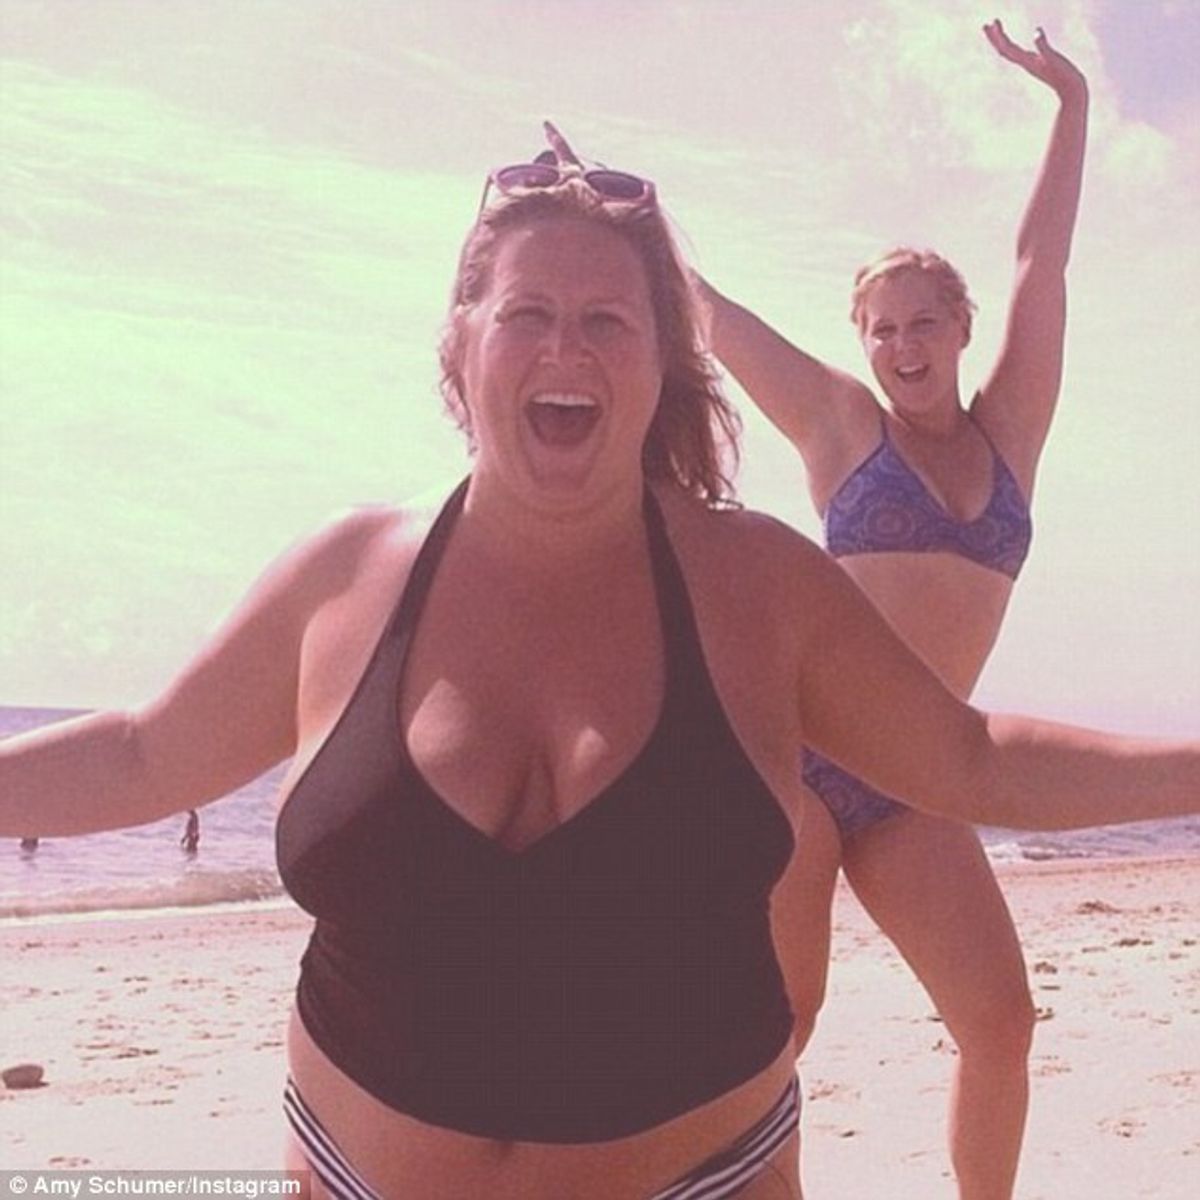 How Amy Schumer's Instagram Affects You